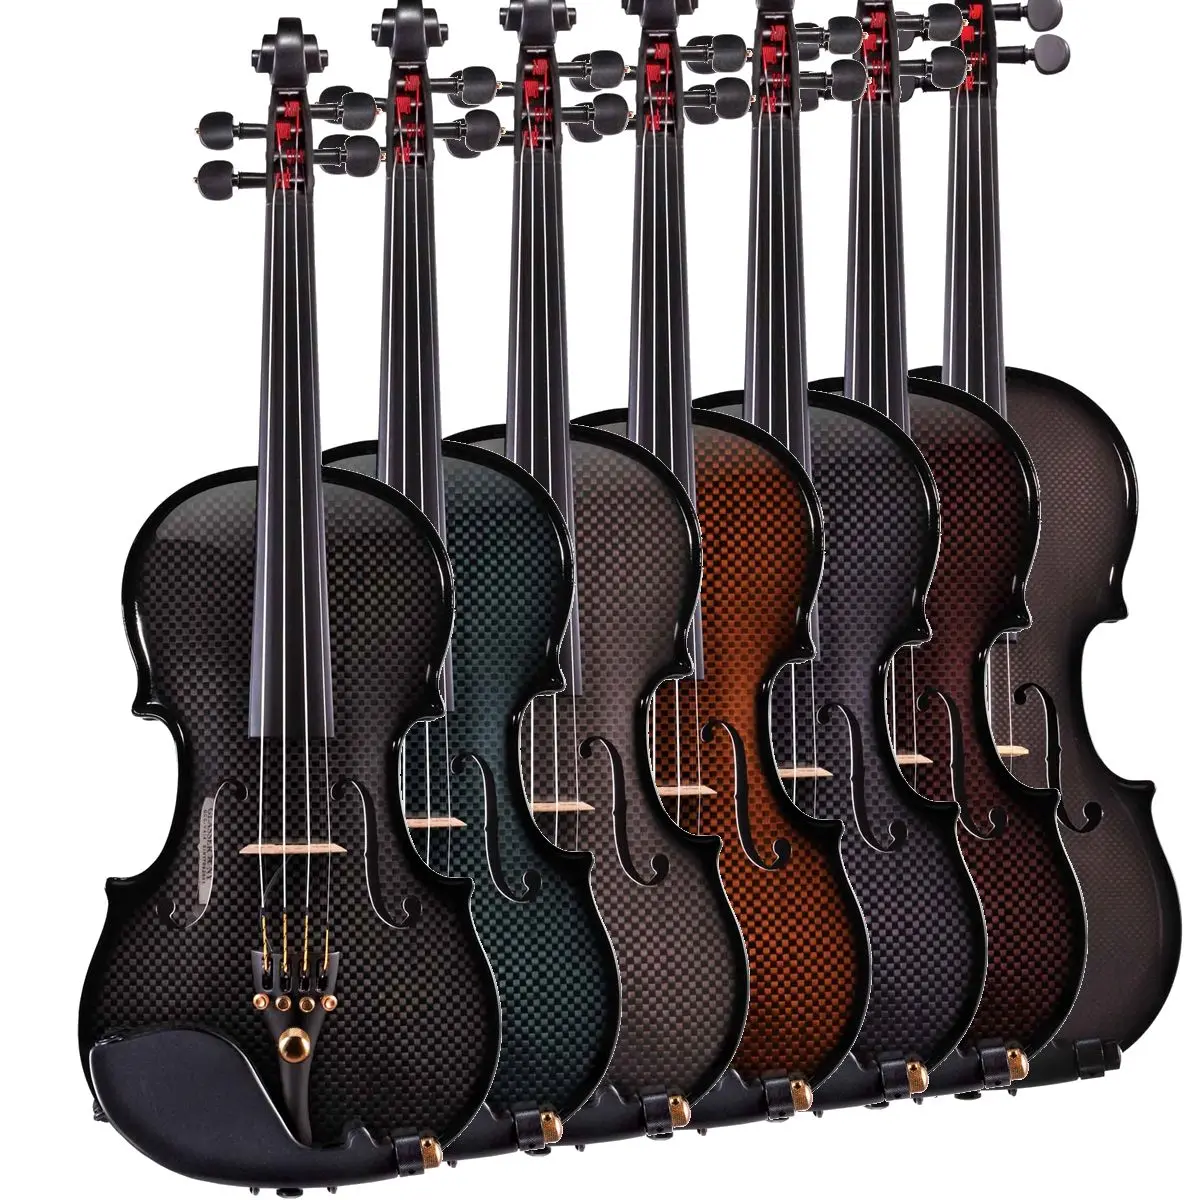 best electro acoustic violin - Why are electric violins cheaper